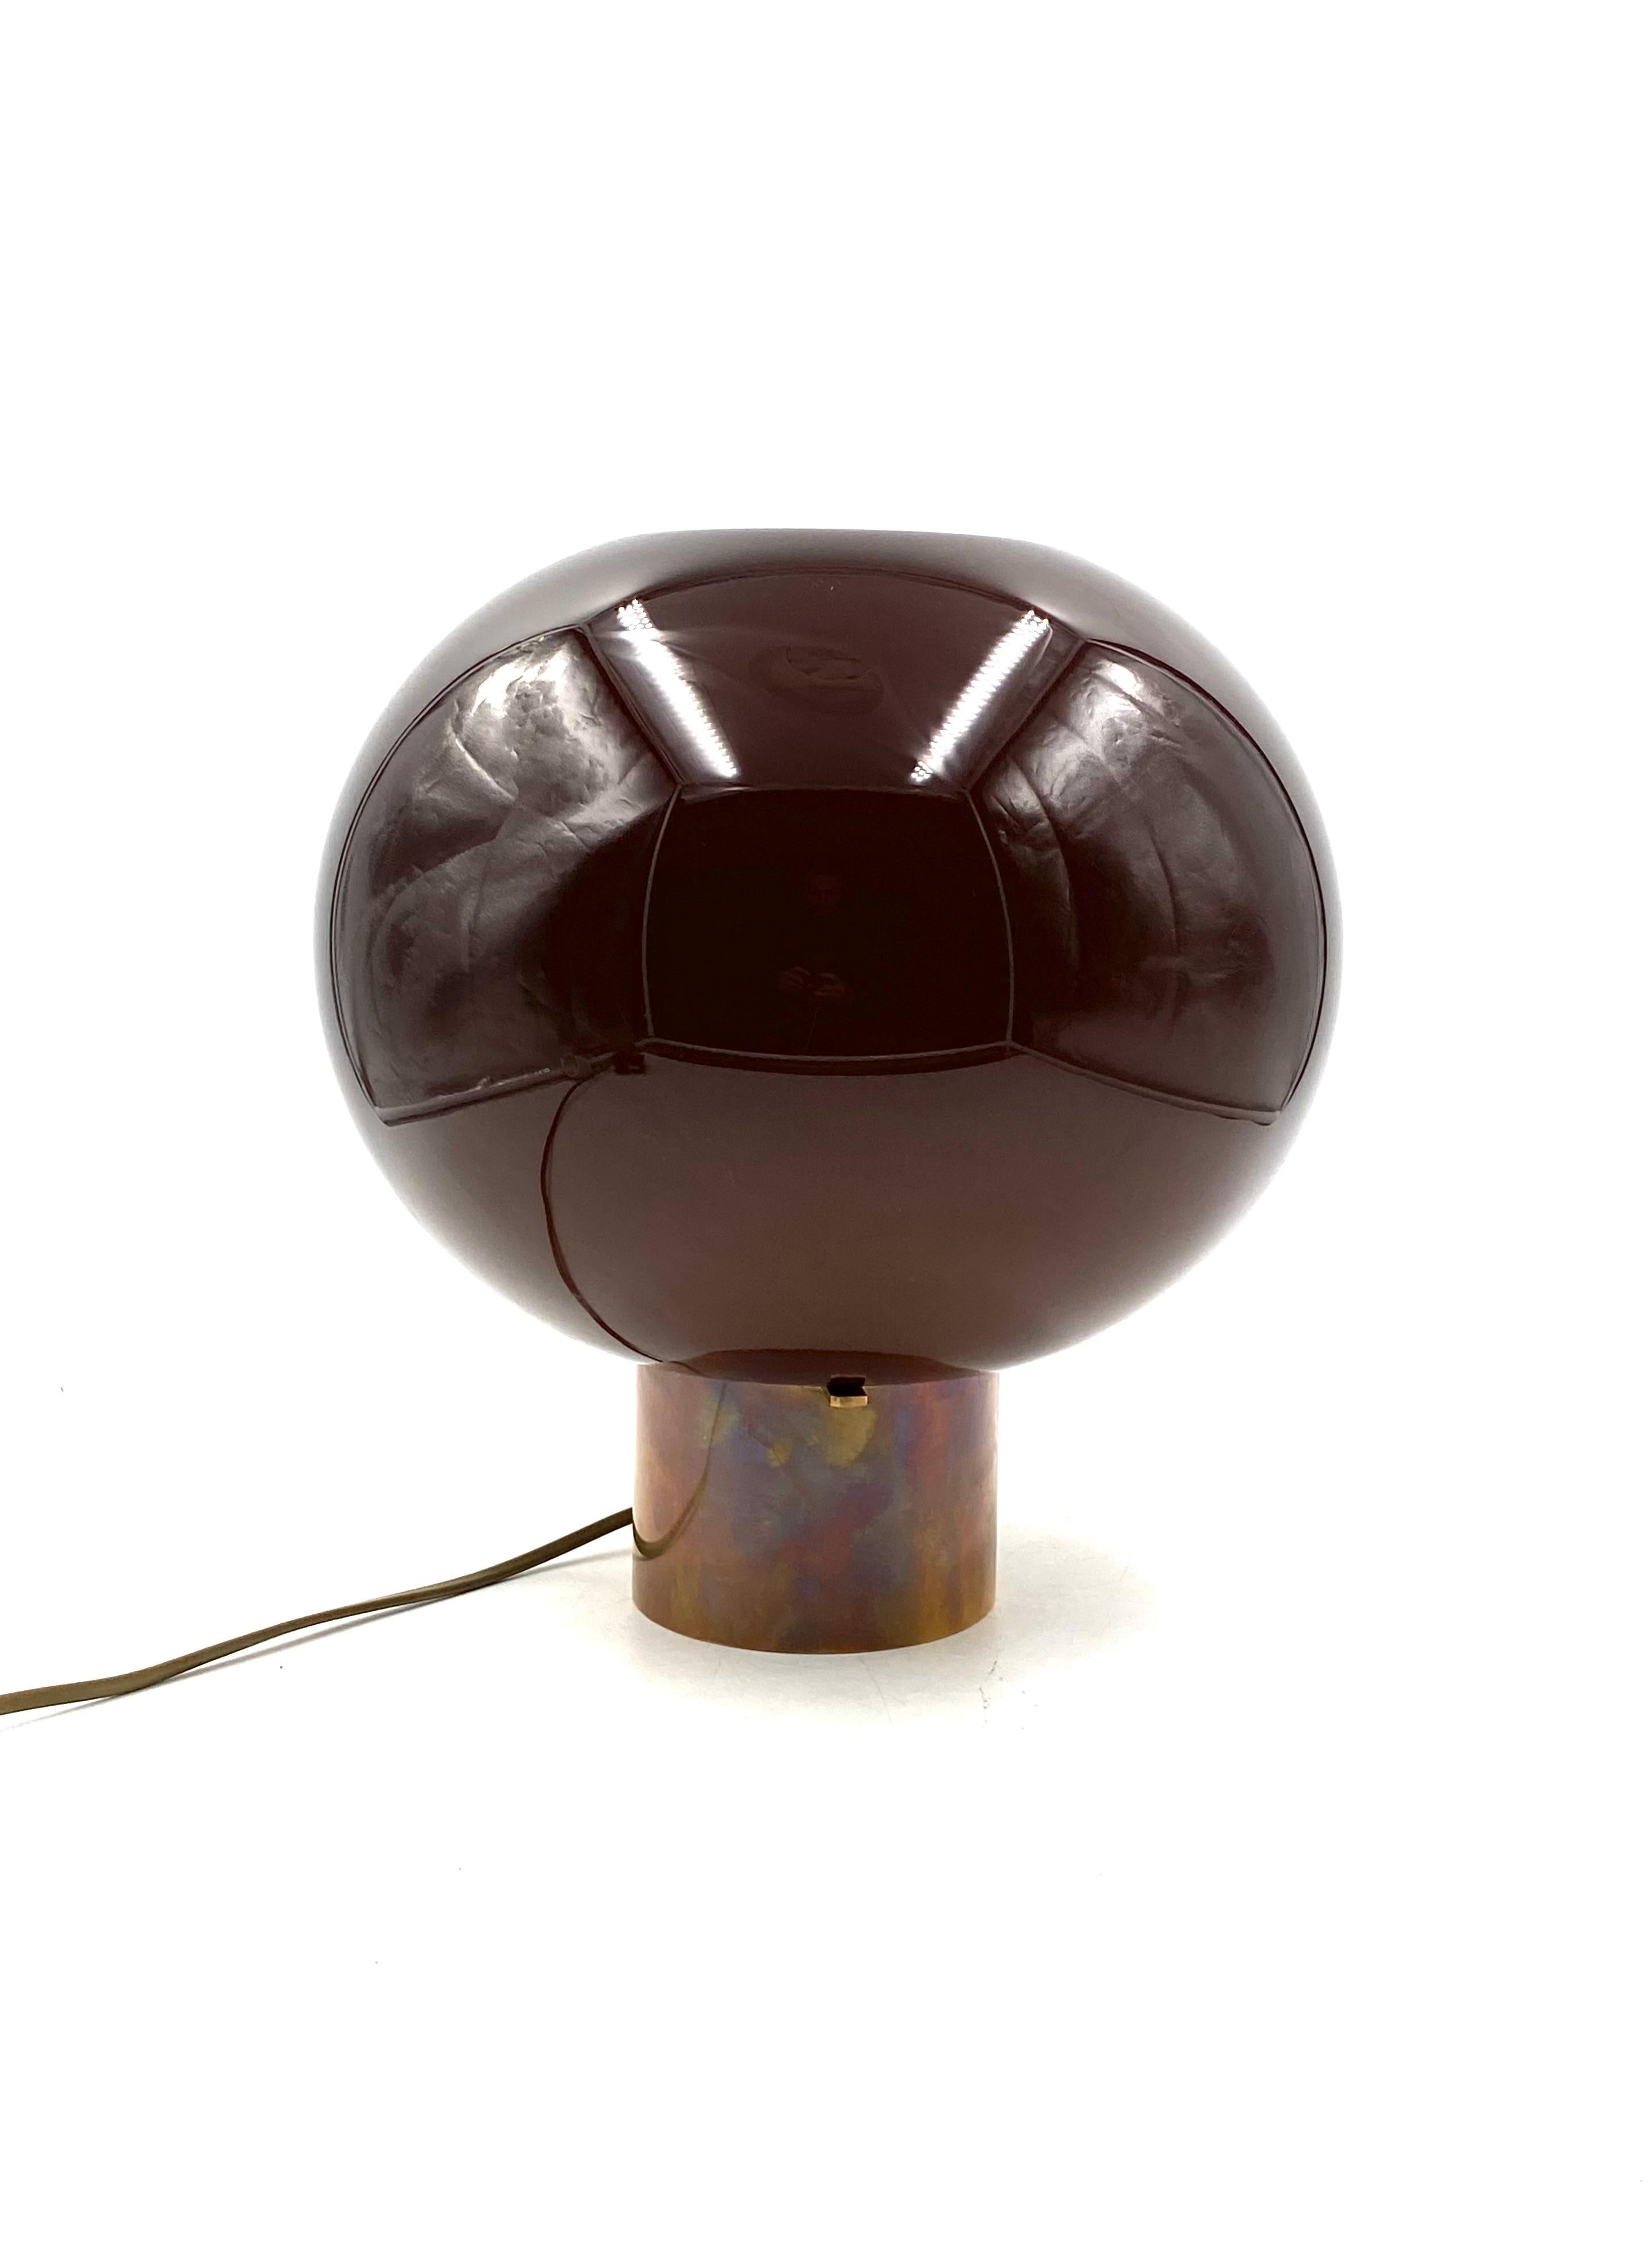 Tabacco brown Murano glass mushroom table lamp, Italy 1980s For Sale 7